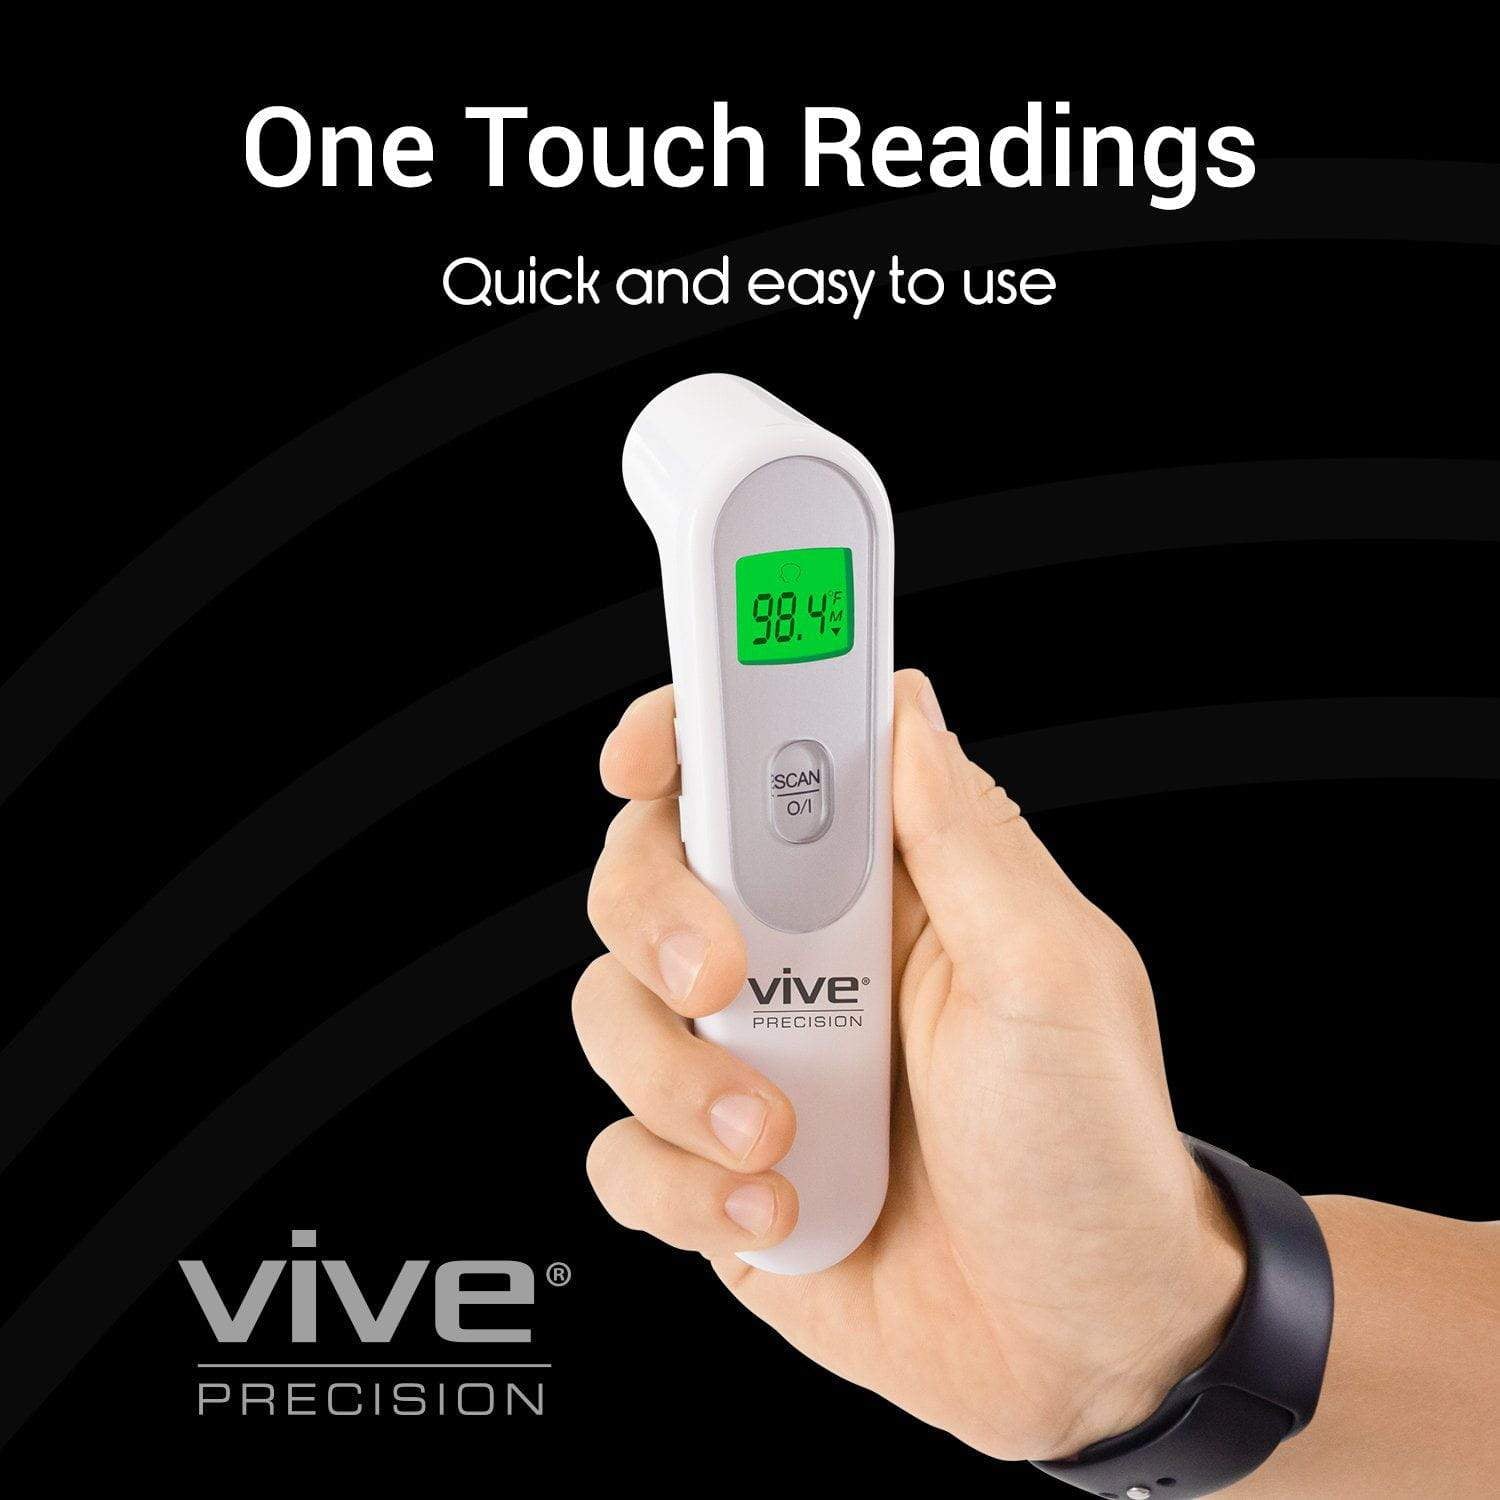 Infrared Thermometers - Vive - Wasatch Medical Supply